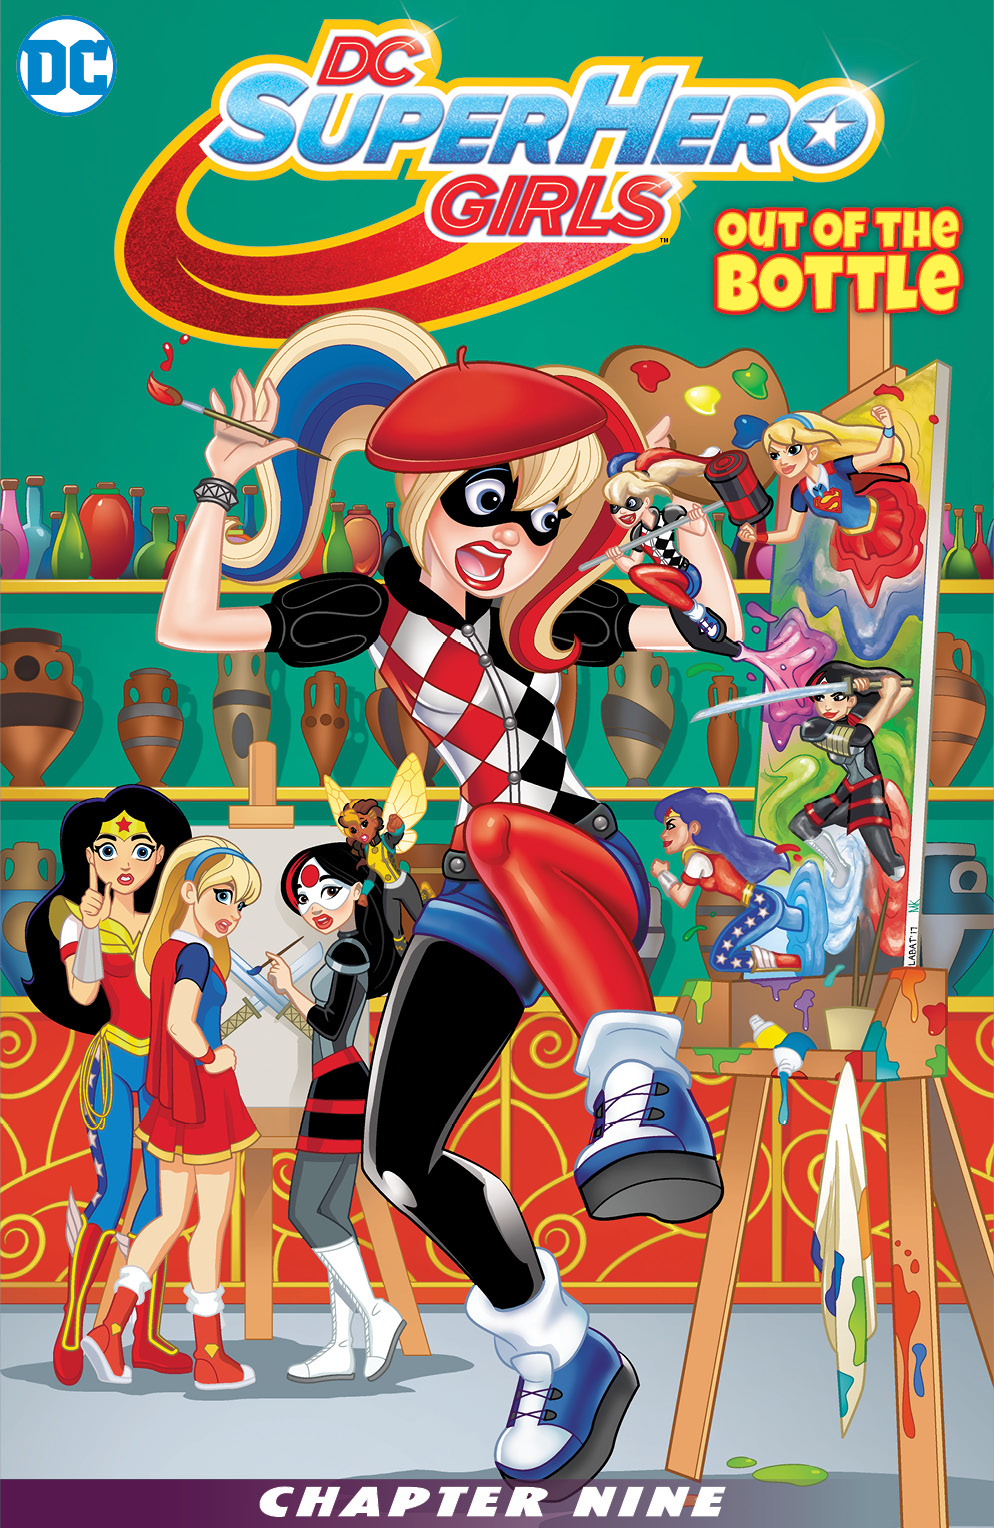 Dc Super Hero Girls 009 Out Of The Bottle 2017 | Read Dc Super Hero Girls  009 Out Of The Bottle 2017 comic online in high quality. Read Full Comic  online for